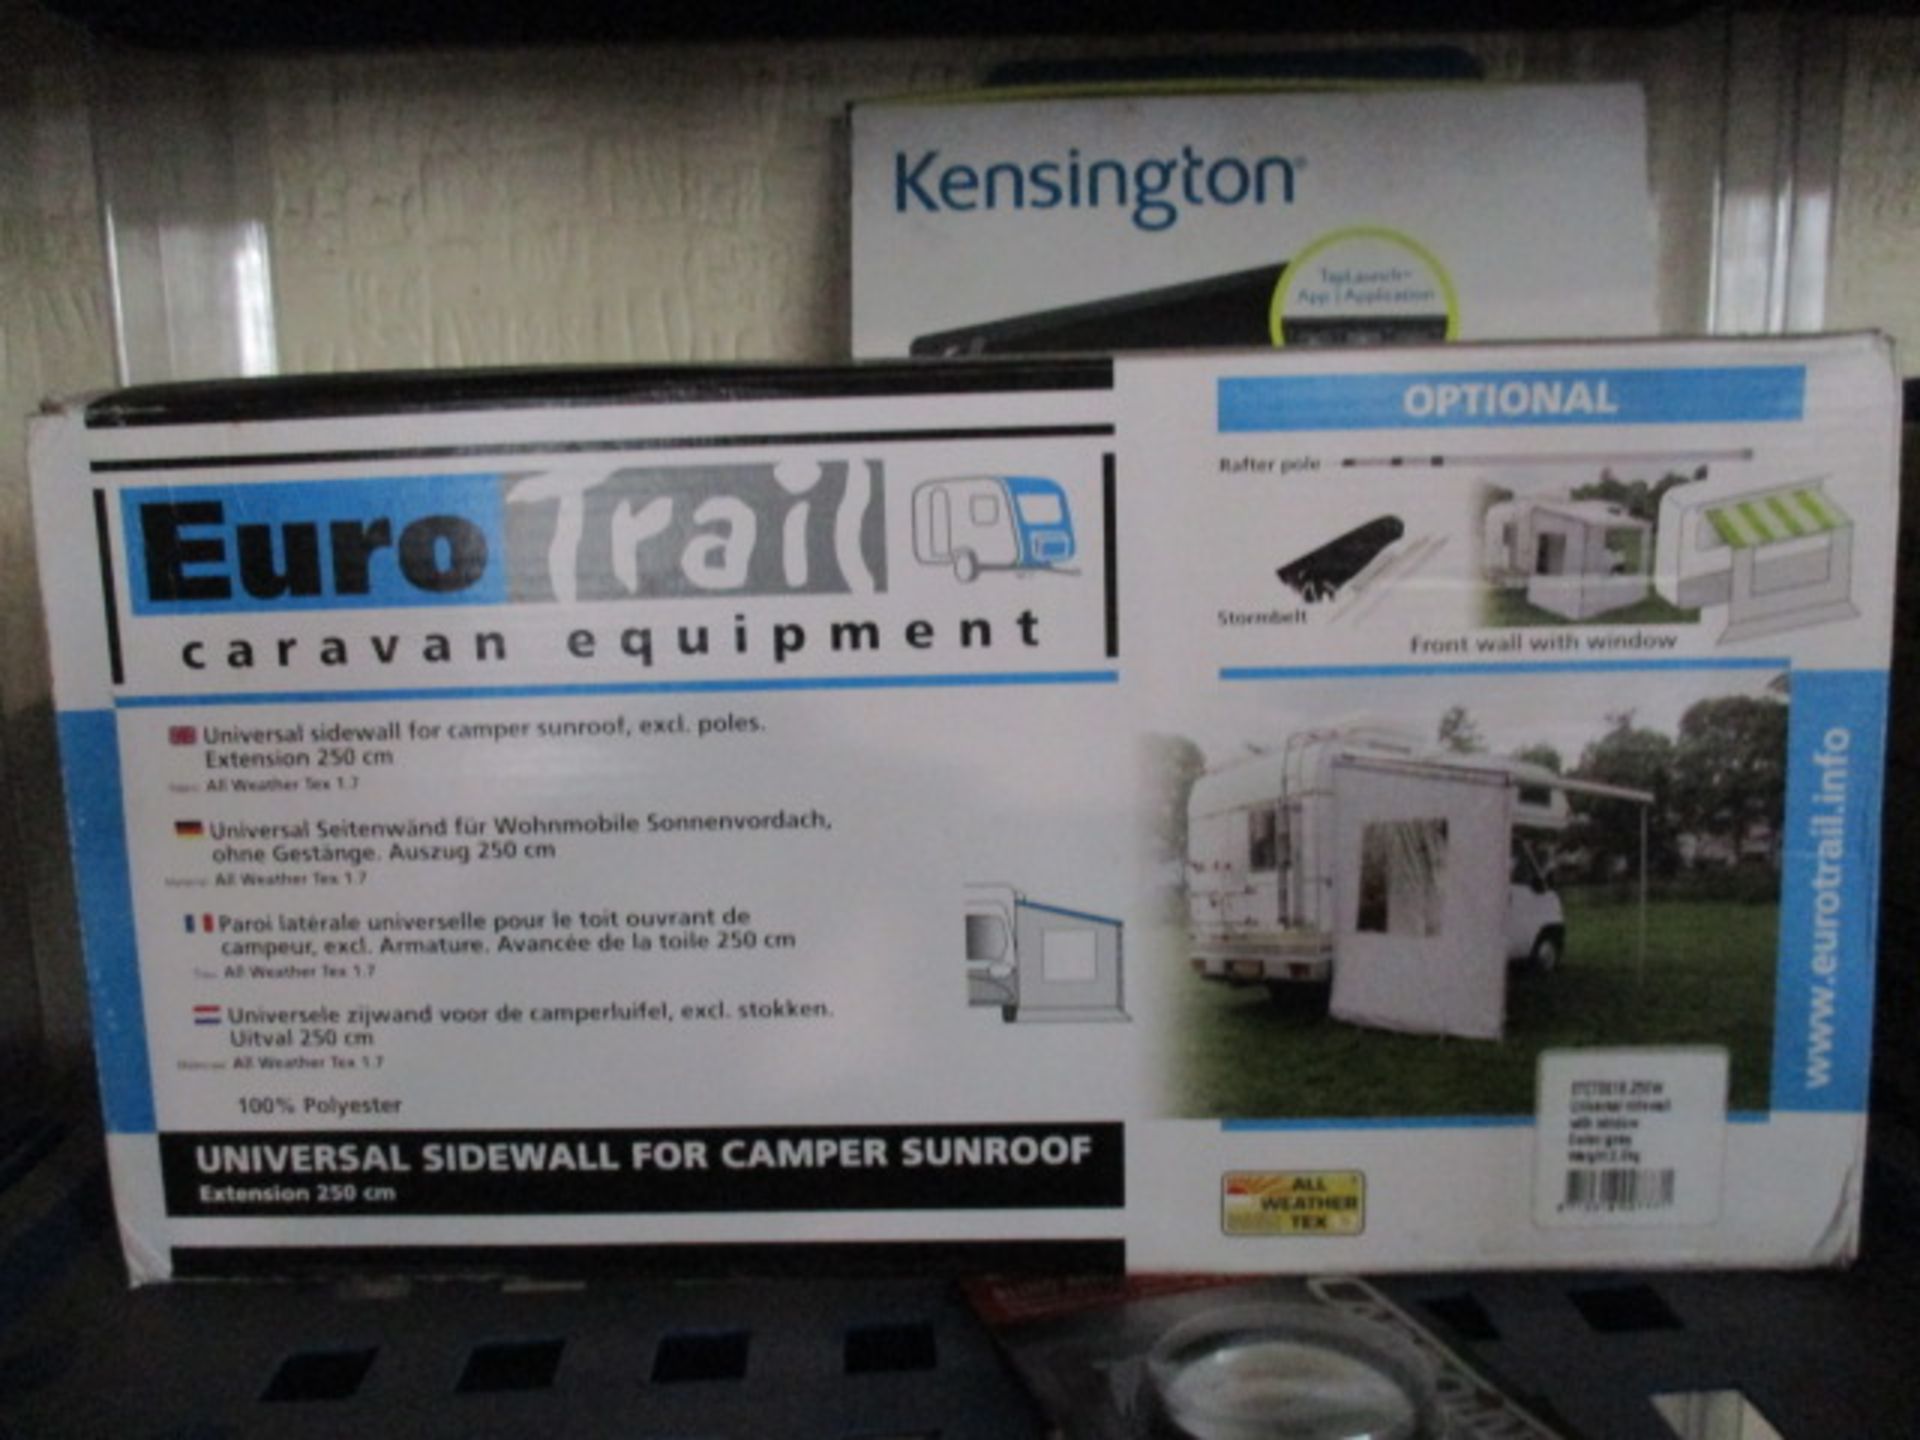 Eurotrail Universal sidewall for camper sunroof looks unopened and boxed